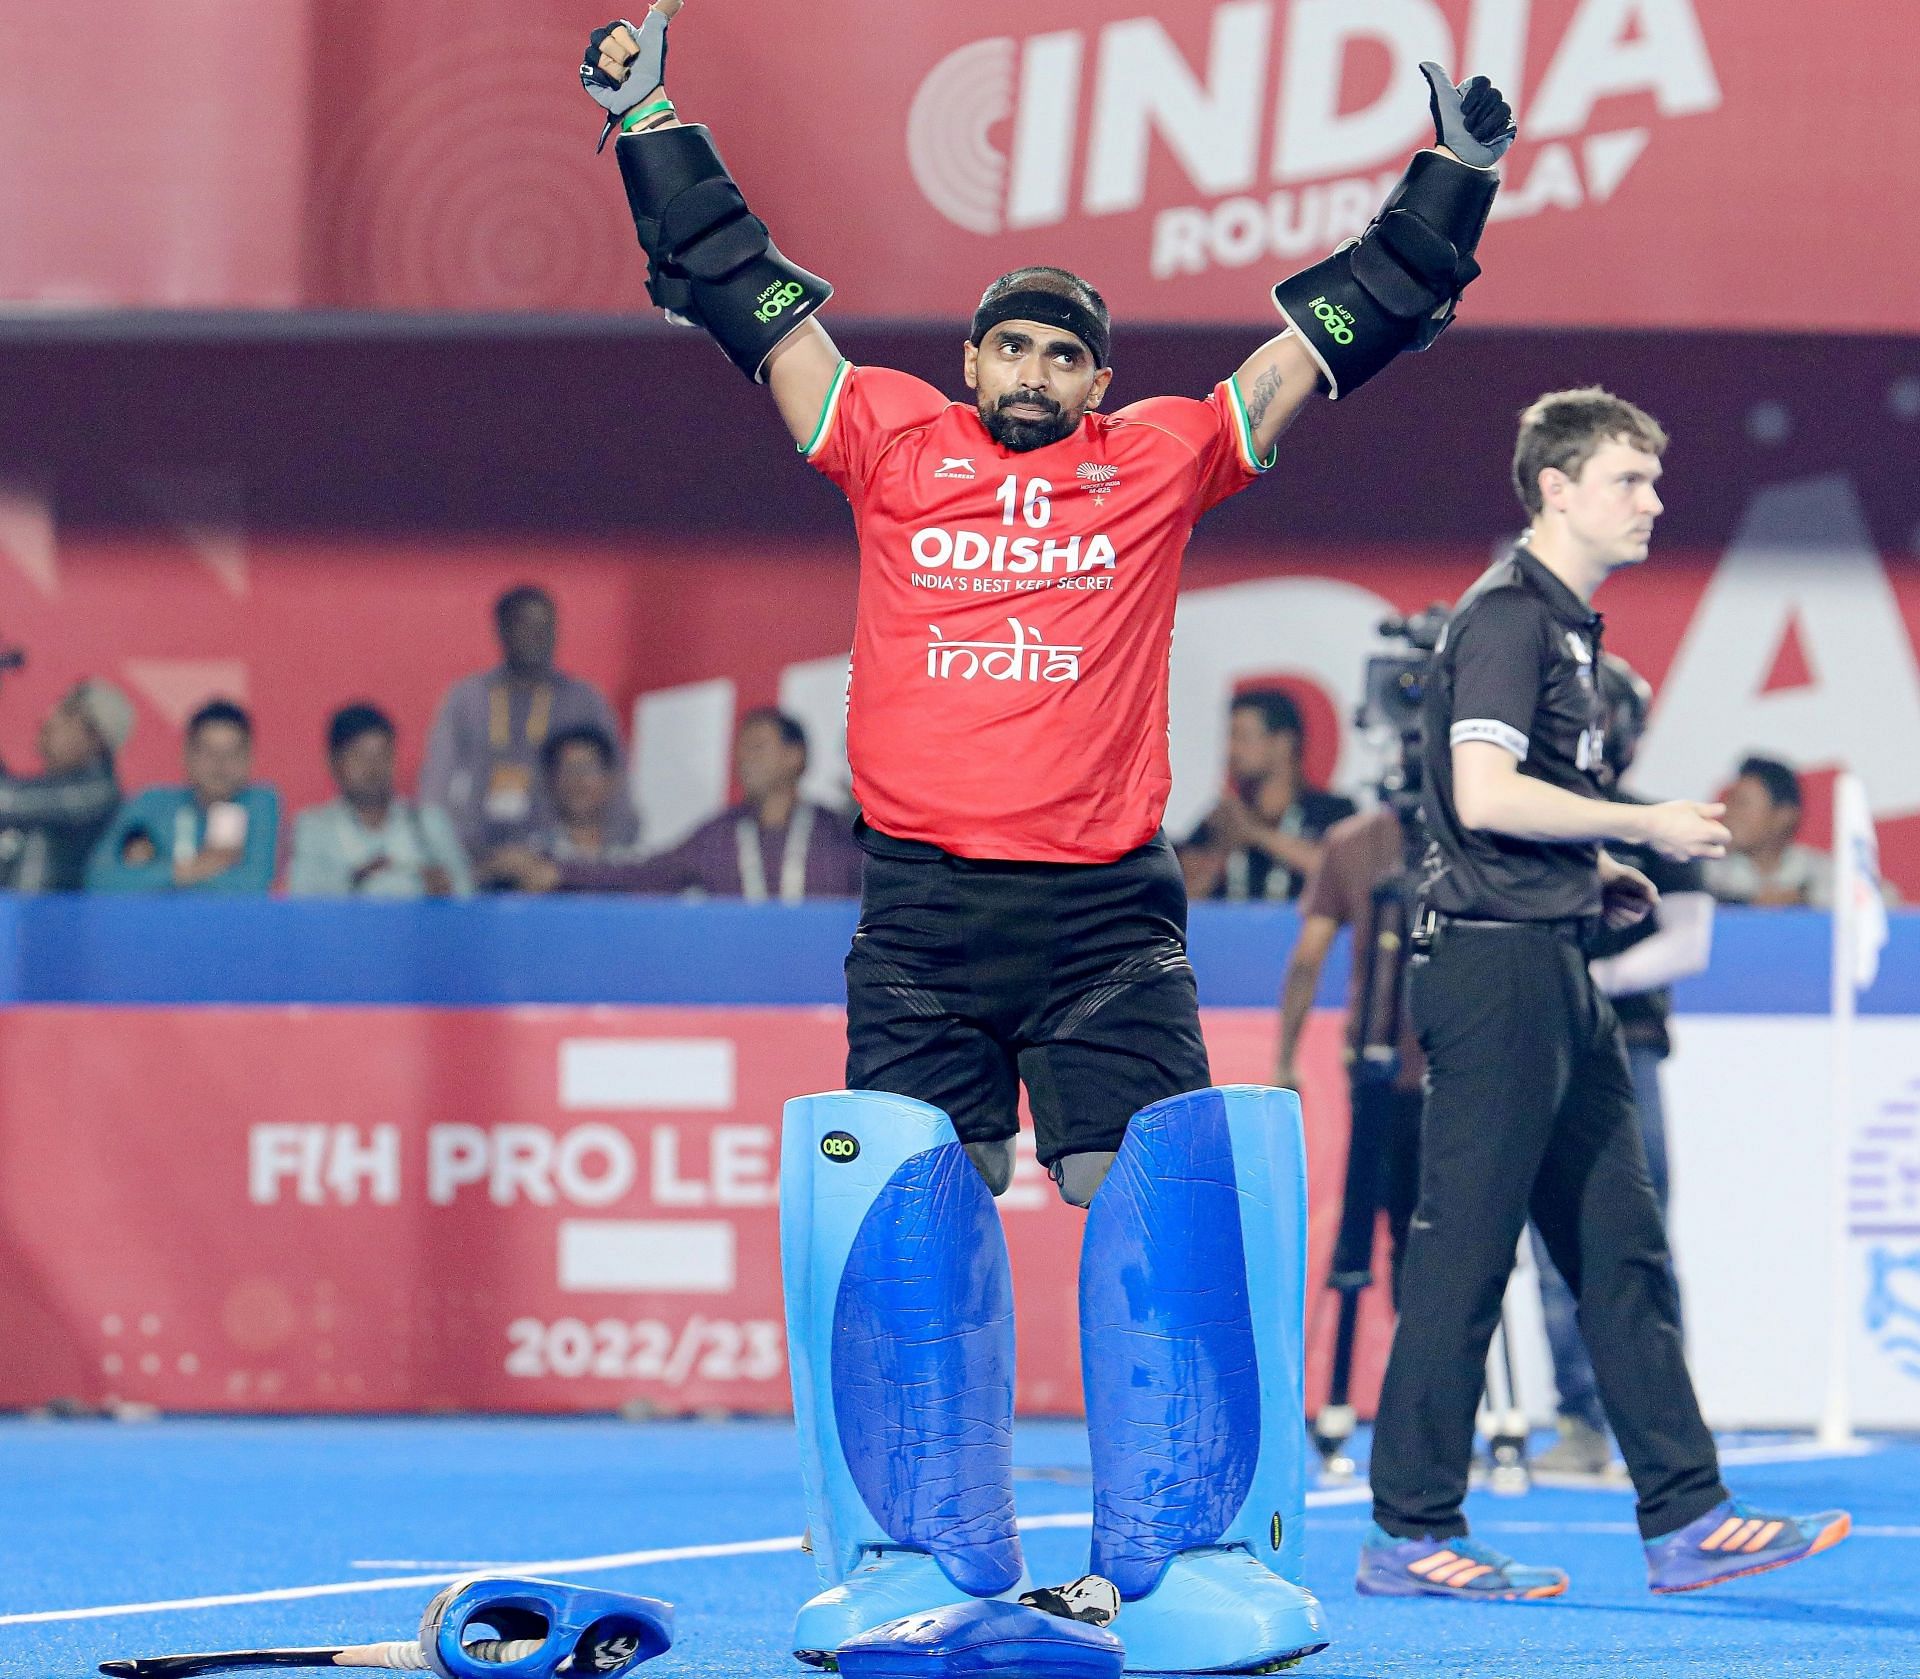 Seasoned goalkeeper PR Sreejesh is among 39 core group of players shortlisted by Hockey India for the national men&rsquo;s coaching camp starting on Saturday in Bengaluru. Photo credit HI